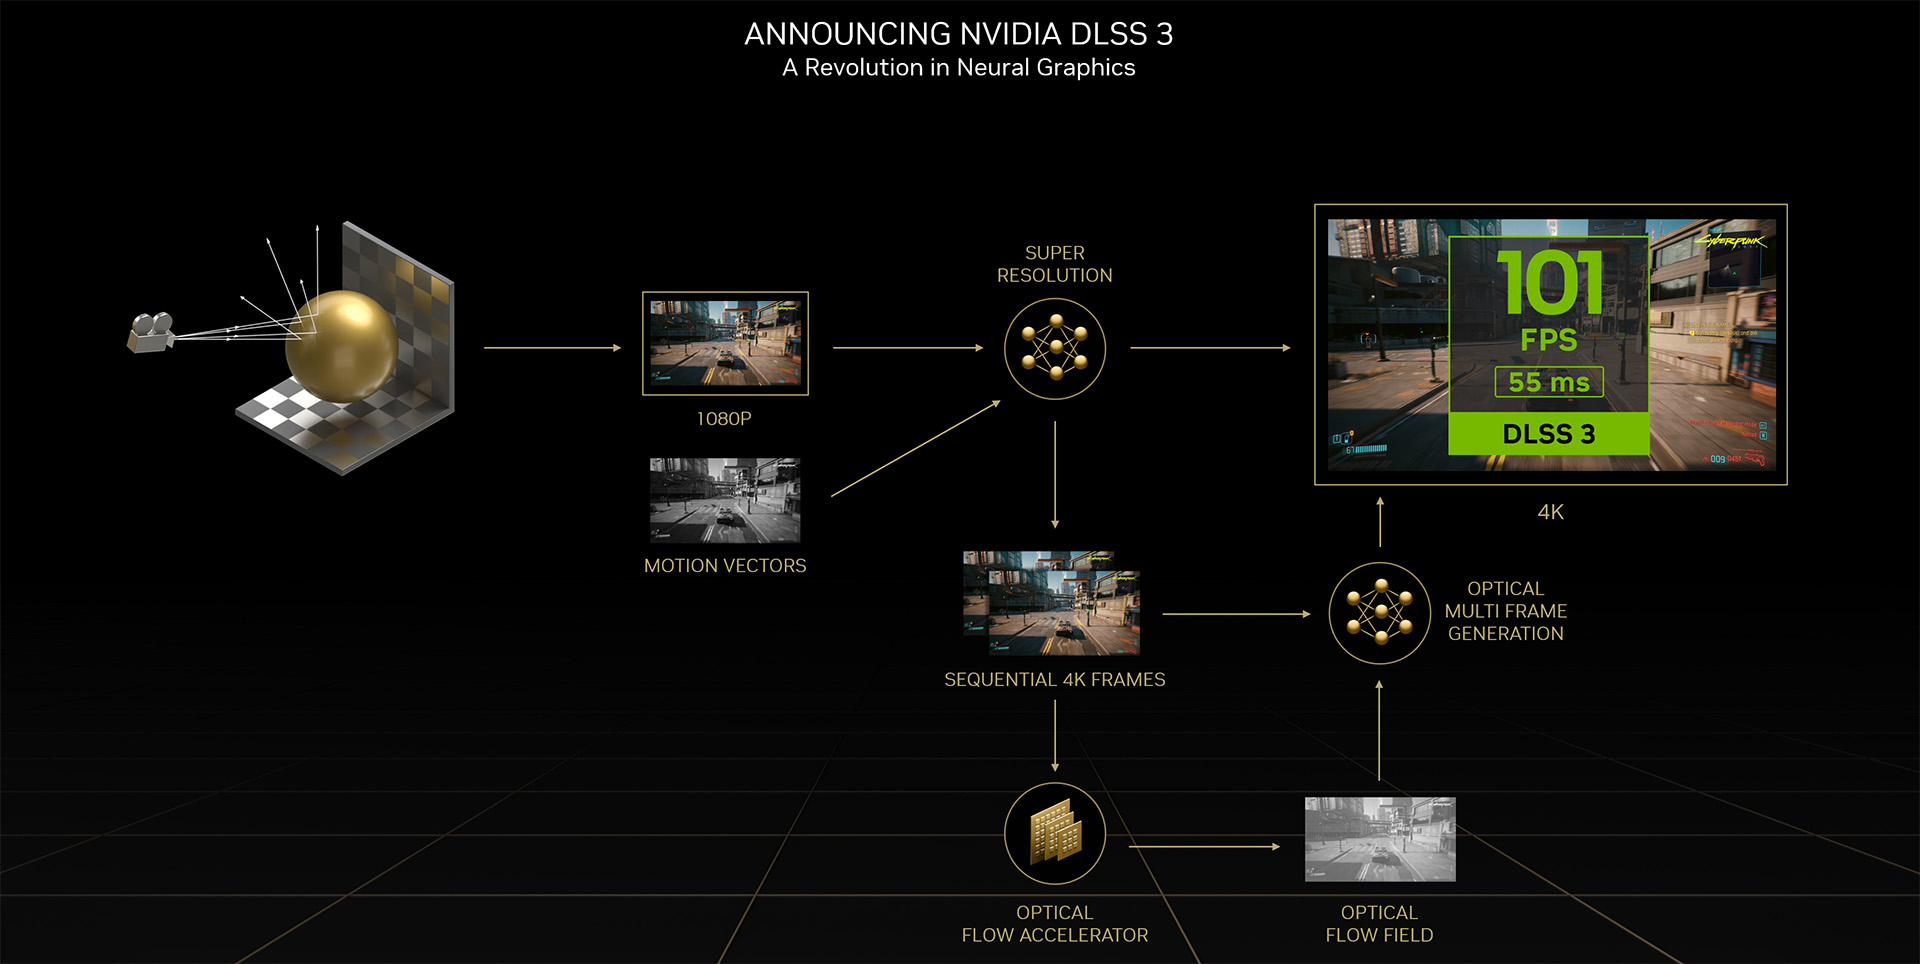 NVIDIA has unveiled DLSS 3 upscaling technology that can build entire frames